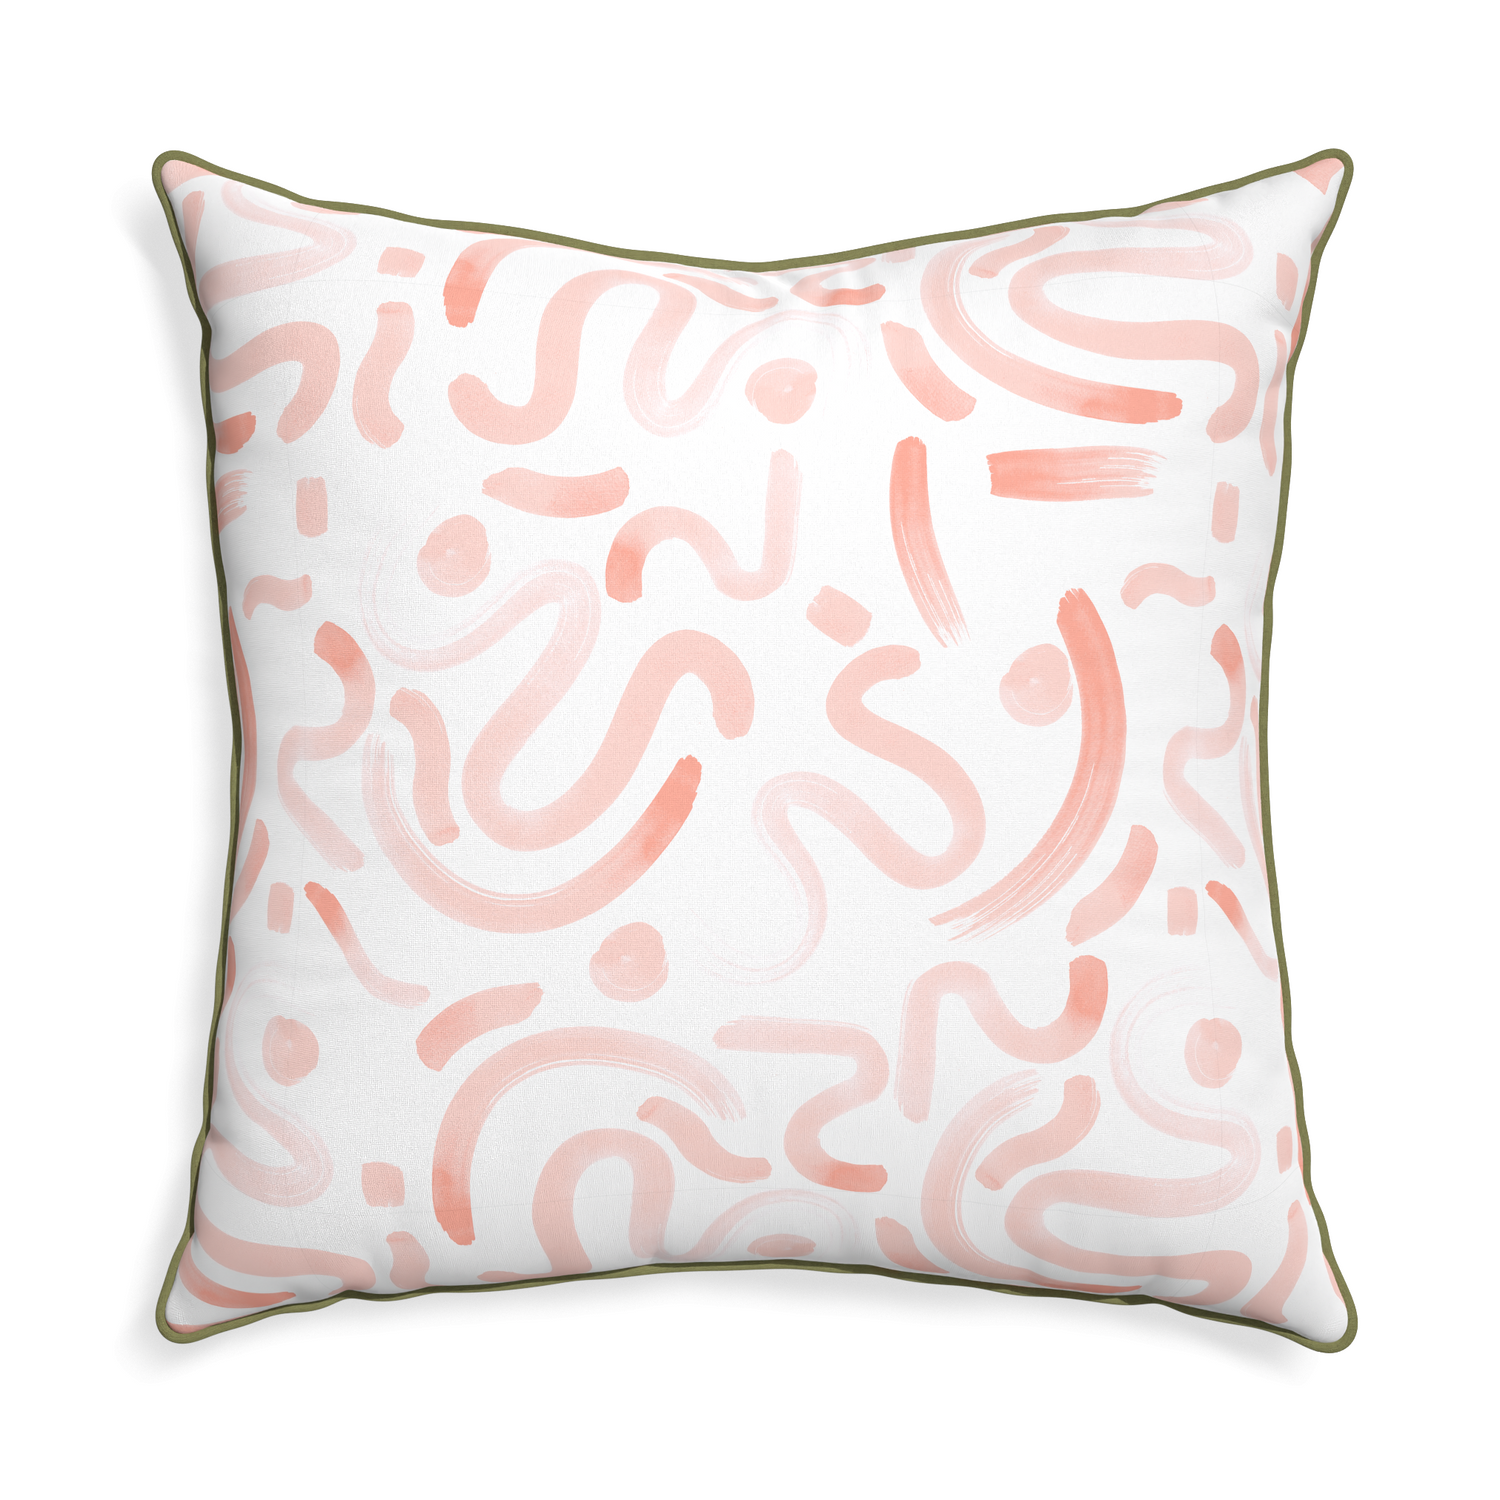 Euro-sham hockney pink custom pillow with moss piping on white background